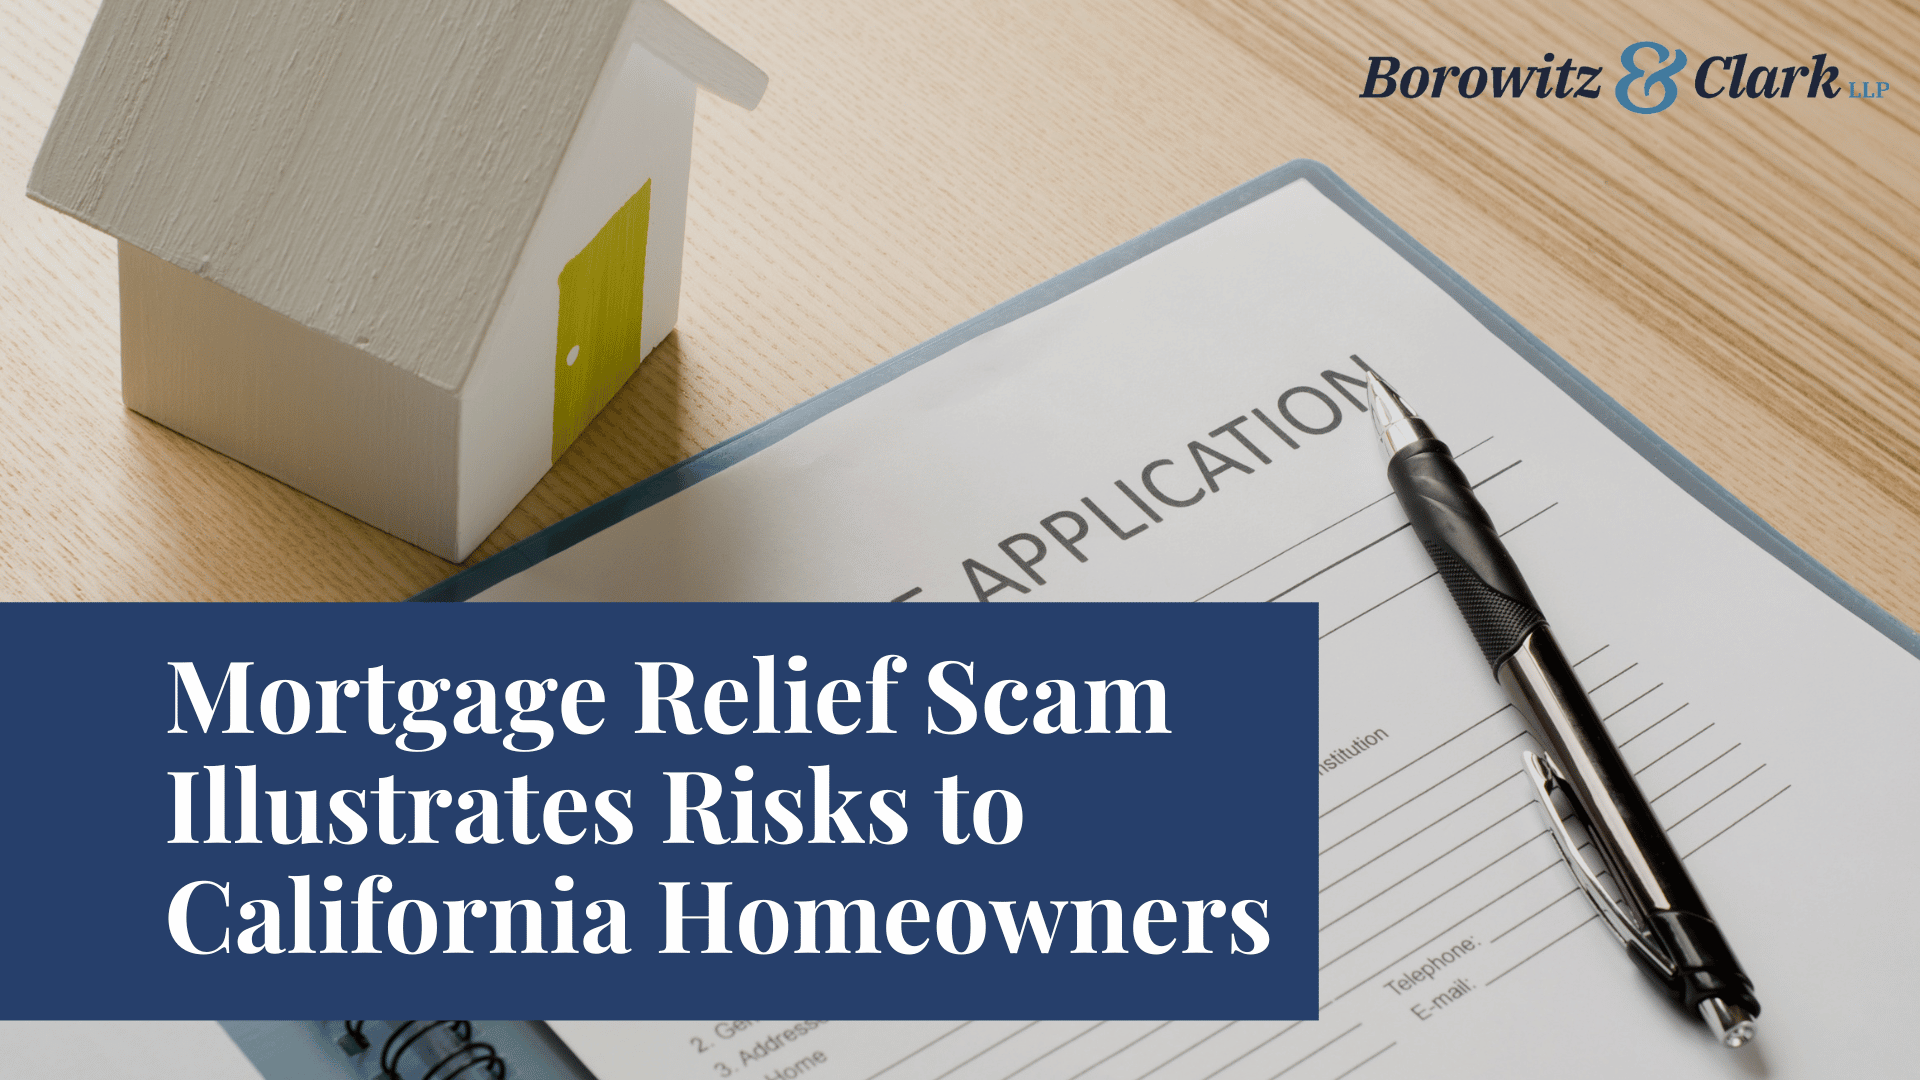 Mortgage Relief Scam Illustrates Risks to California Homeowners